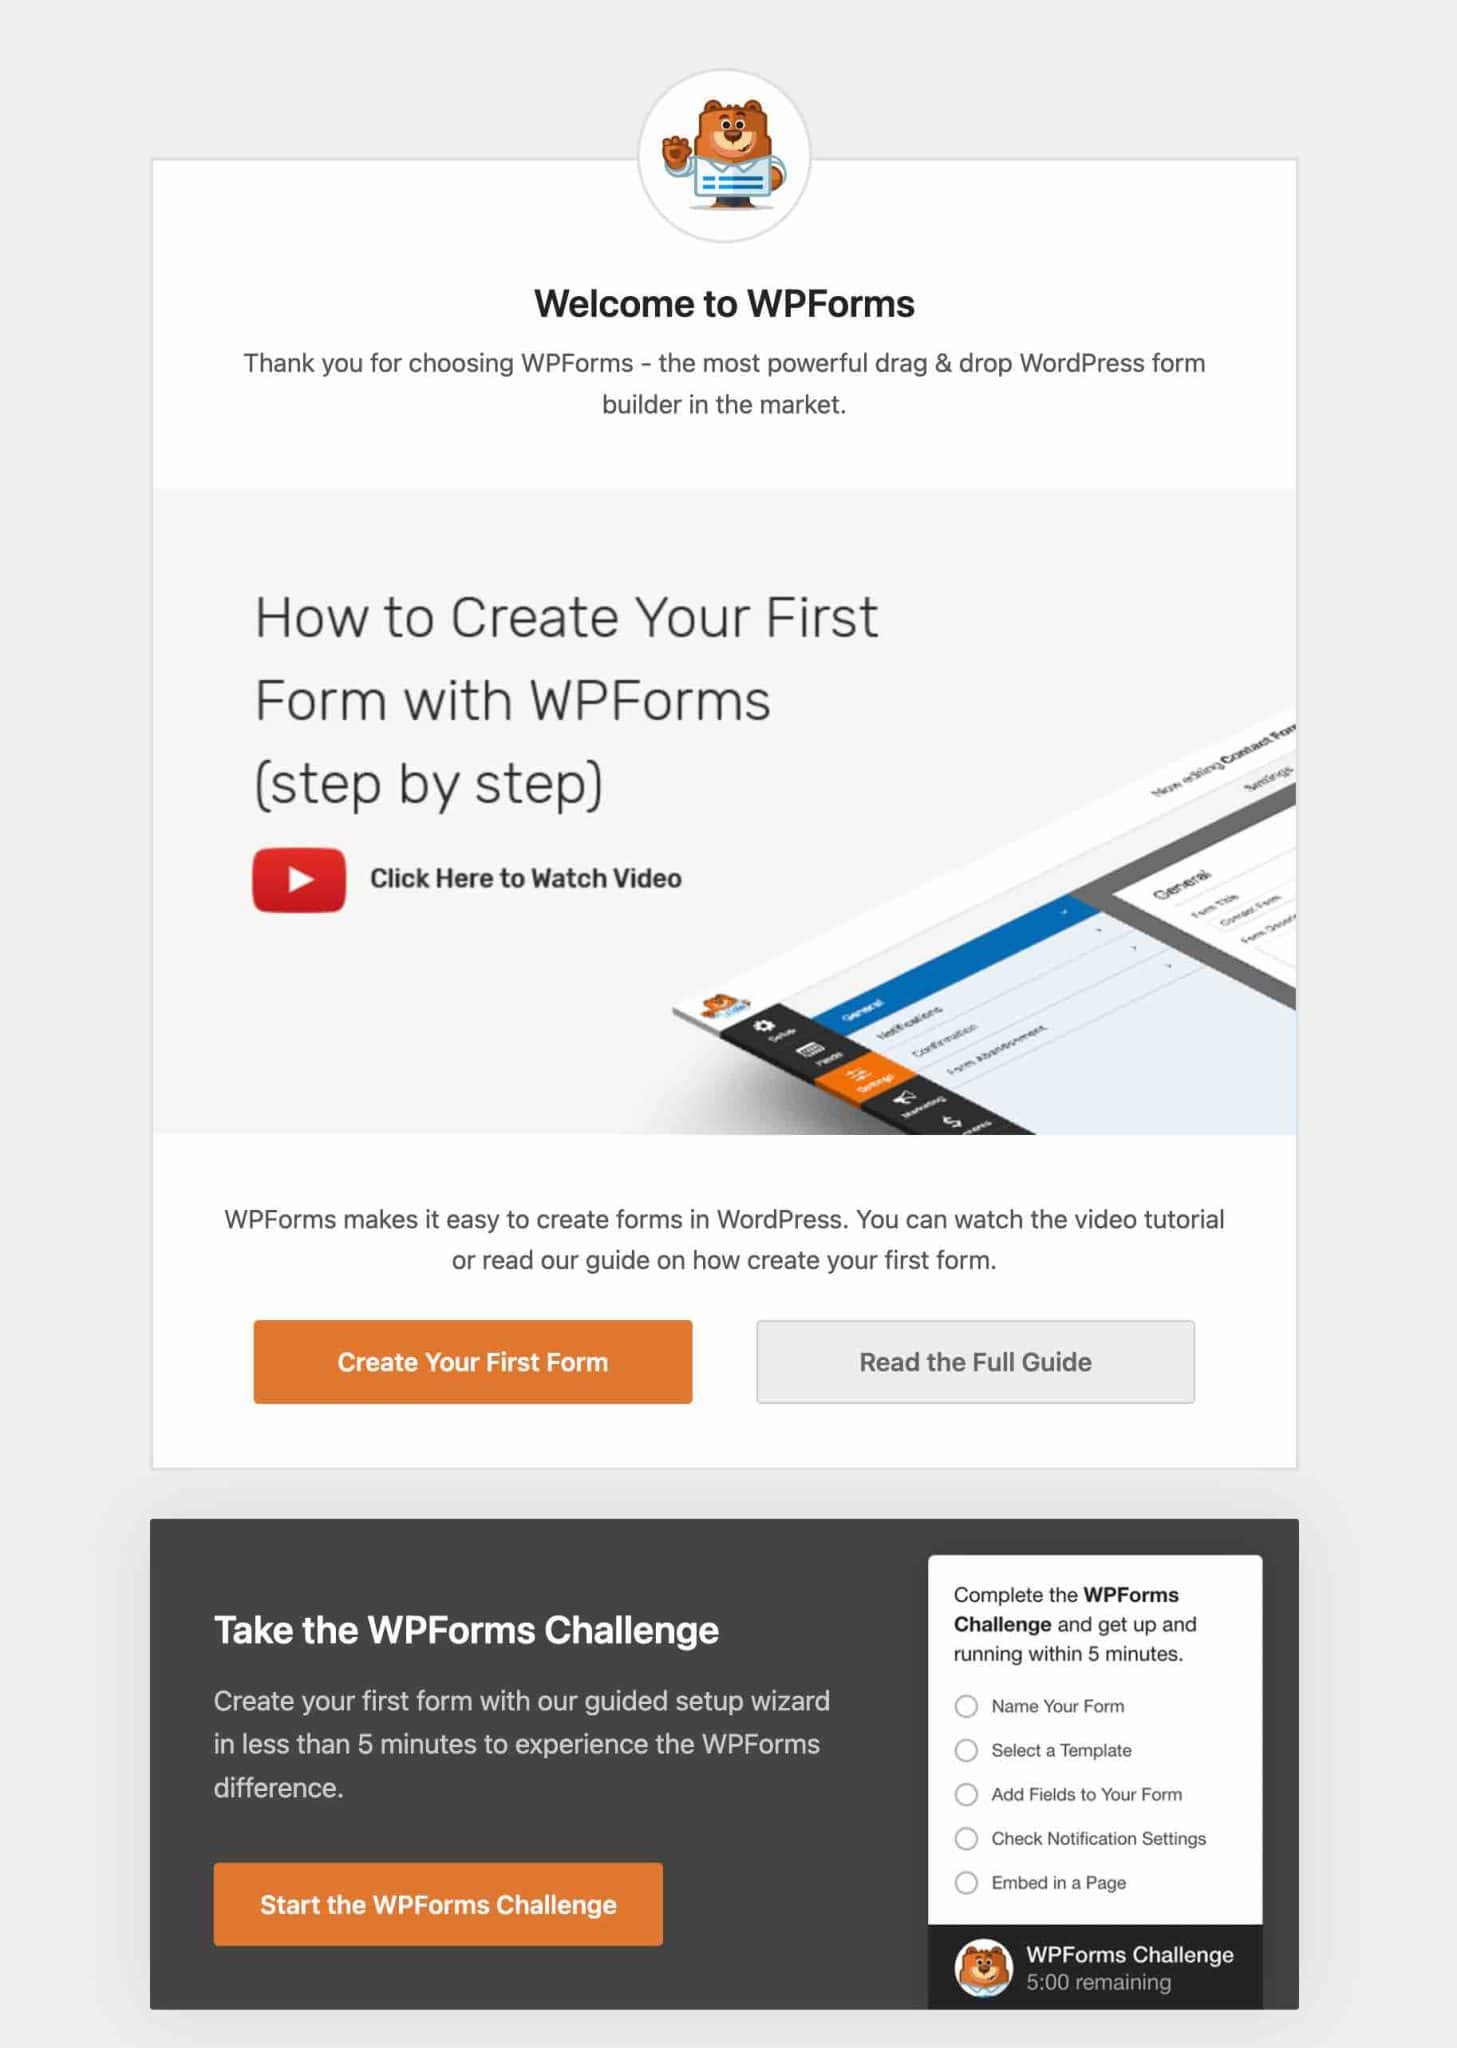 Welcome landing page of WPForms to help you create your first form.